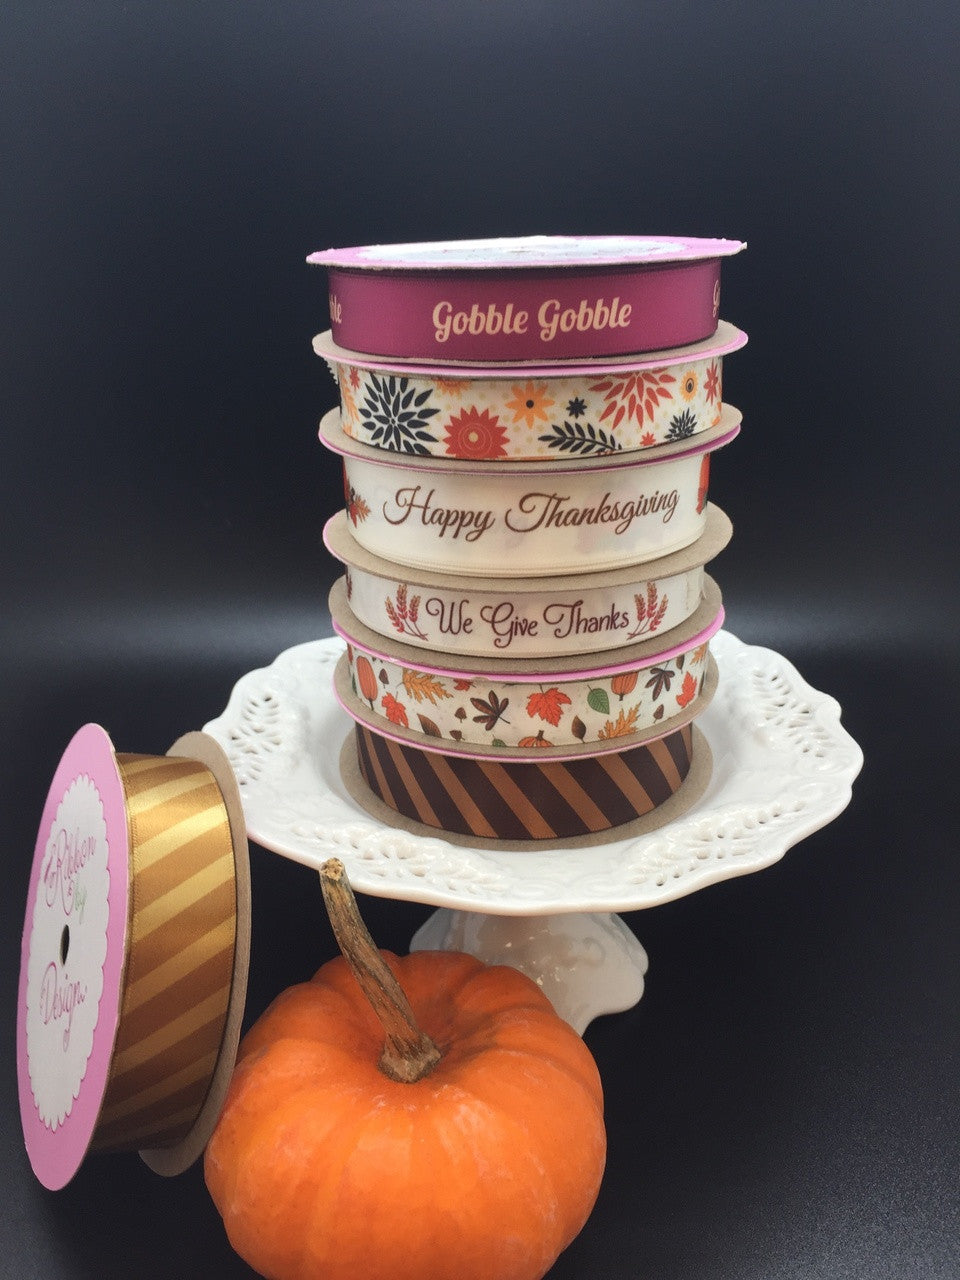 Mix and match our Thanks giving ribbons with our Fall decor ribbons to create a beautiful Thanksgiving theme for your home, gifts and creative crafting ideas.